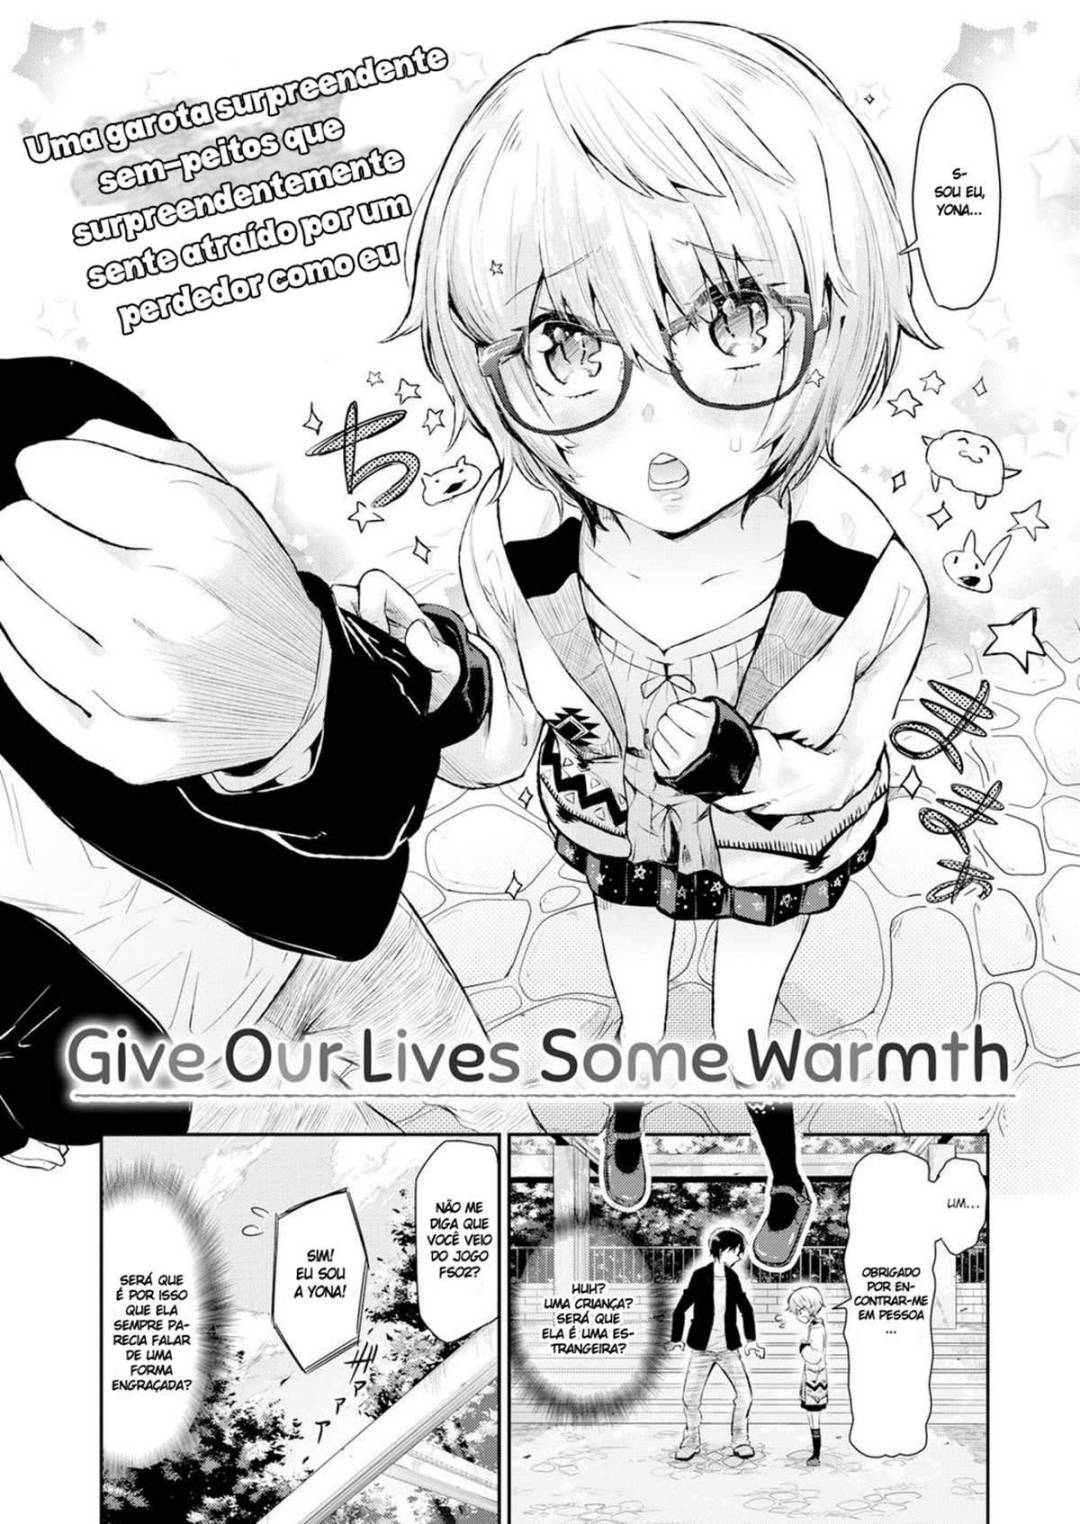 give-our-lives-some-warmth-1.jpg